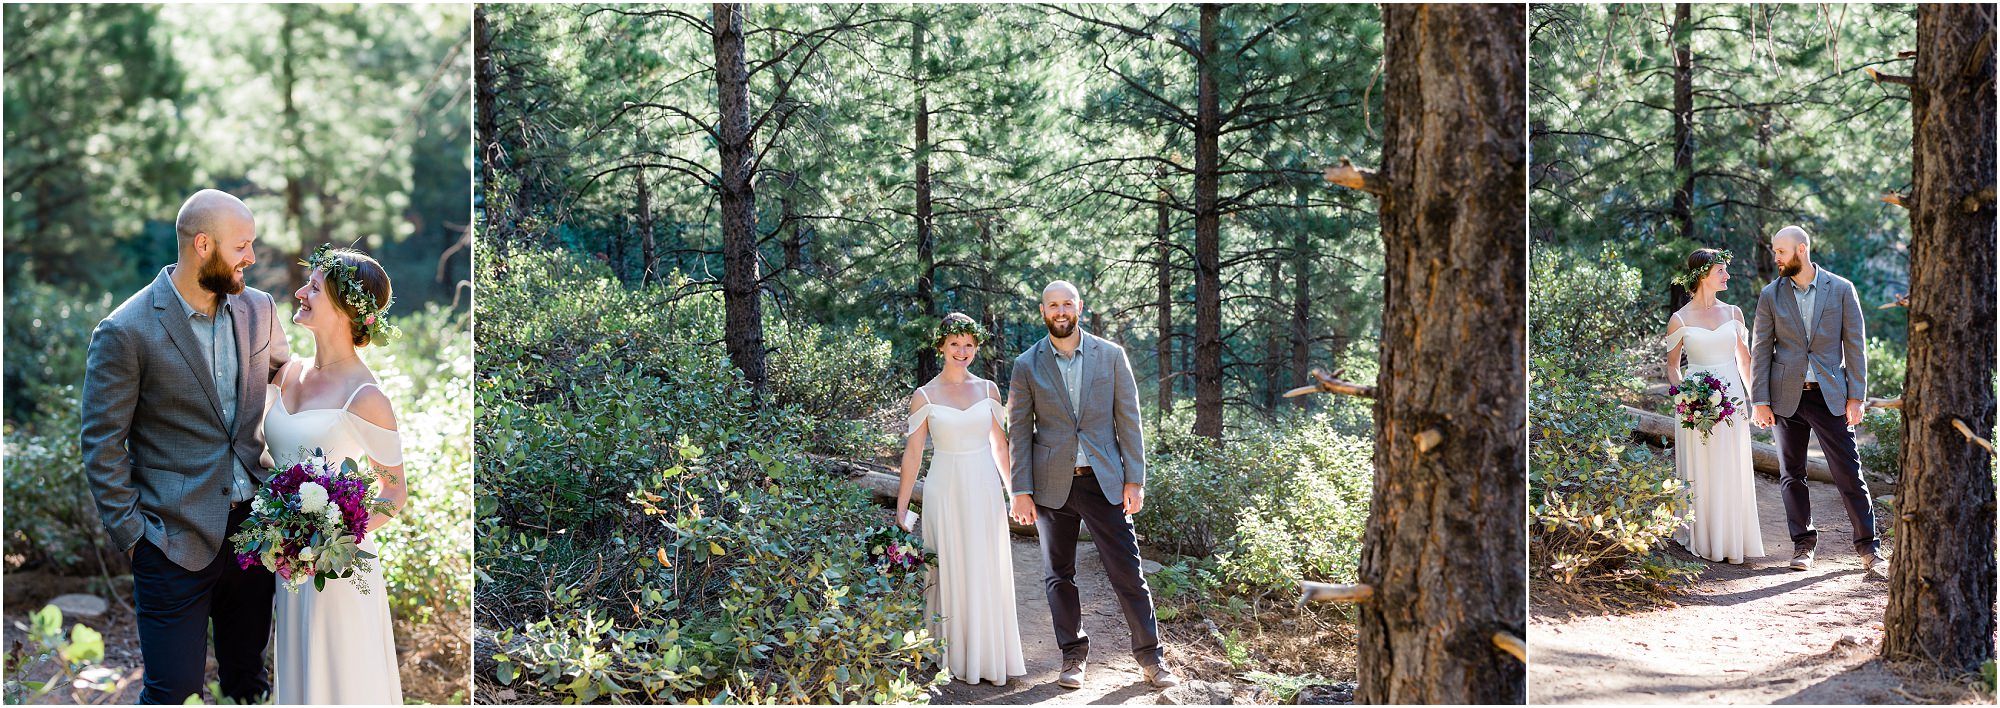 A couple that just eloped in Bend Oregon stands in the tall pine trees just after sunrise near Tumalo Falls. | Erica Swantek Photography